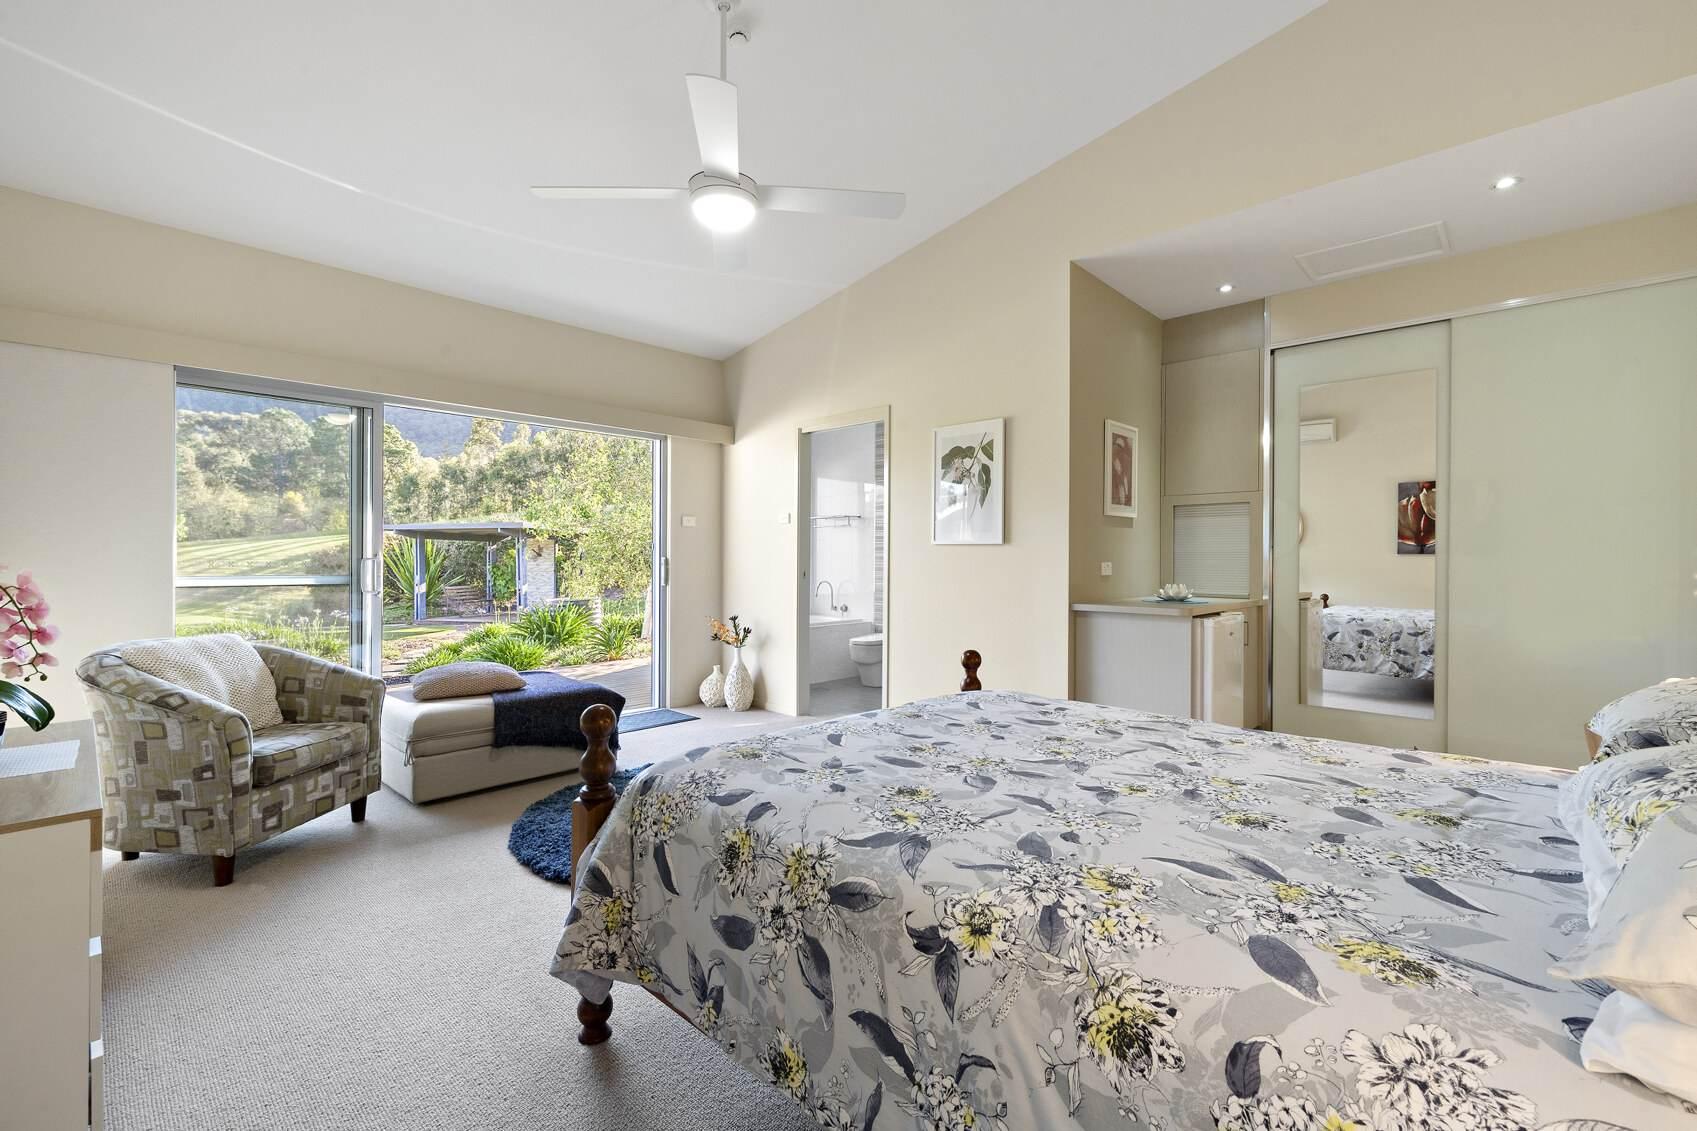 All three bedrooms in this rural property for sale NSW feature ensuites, built-in robes, and private decks